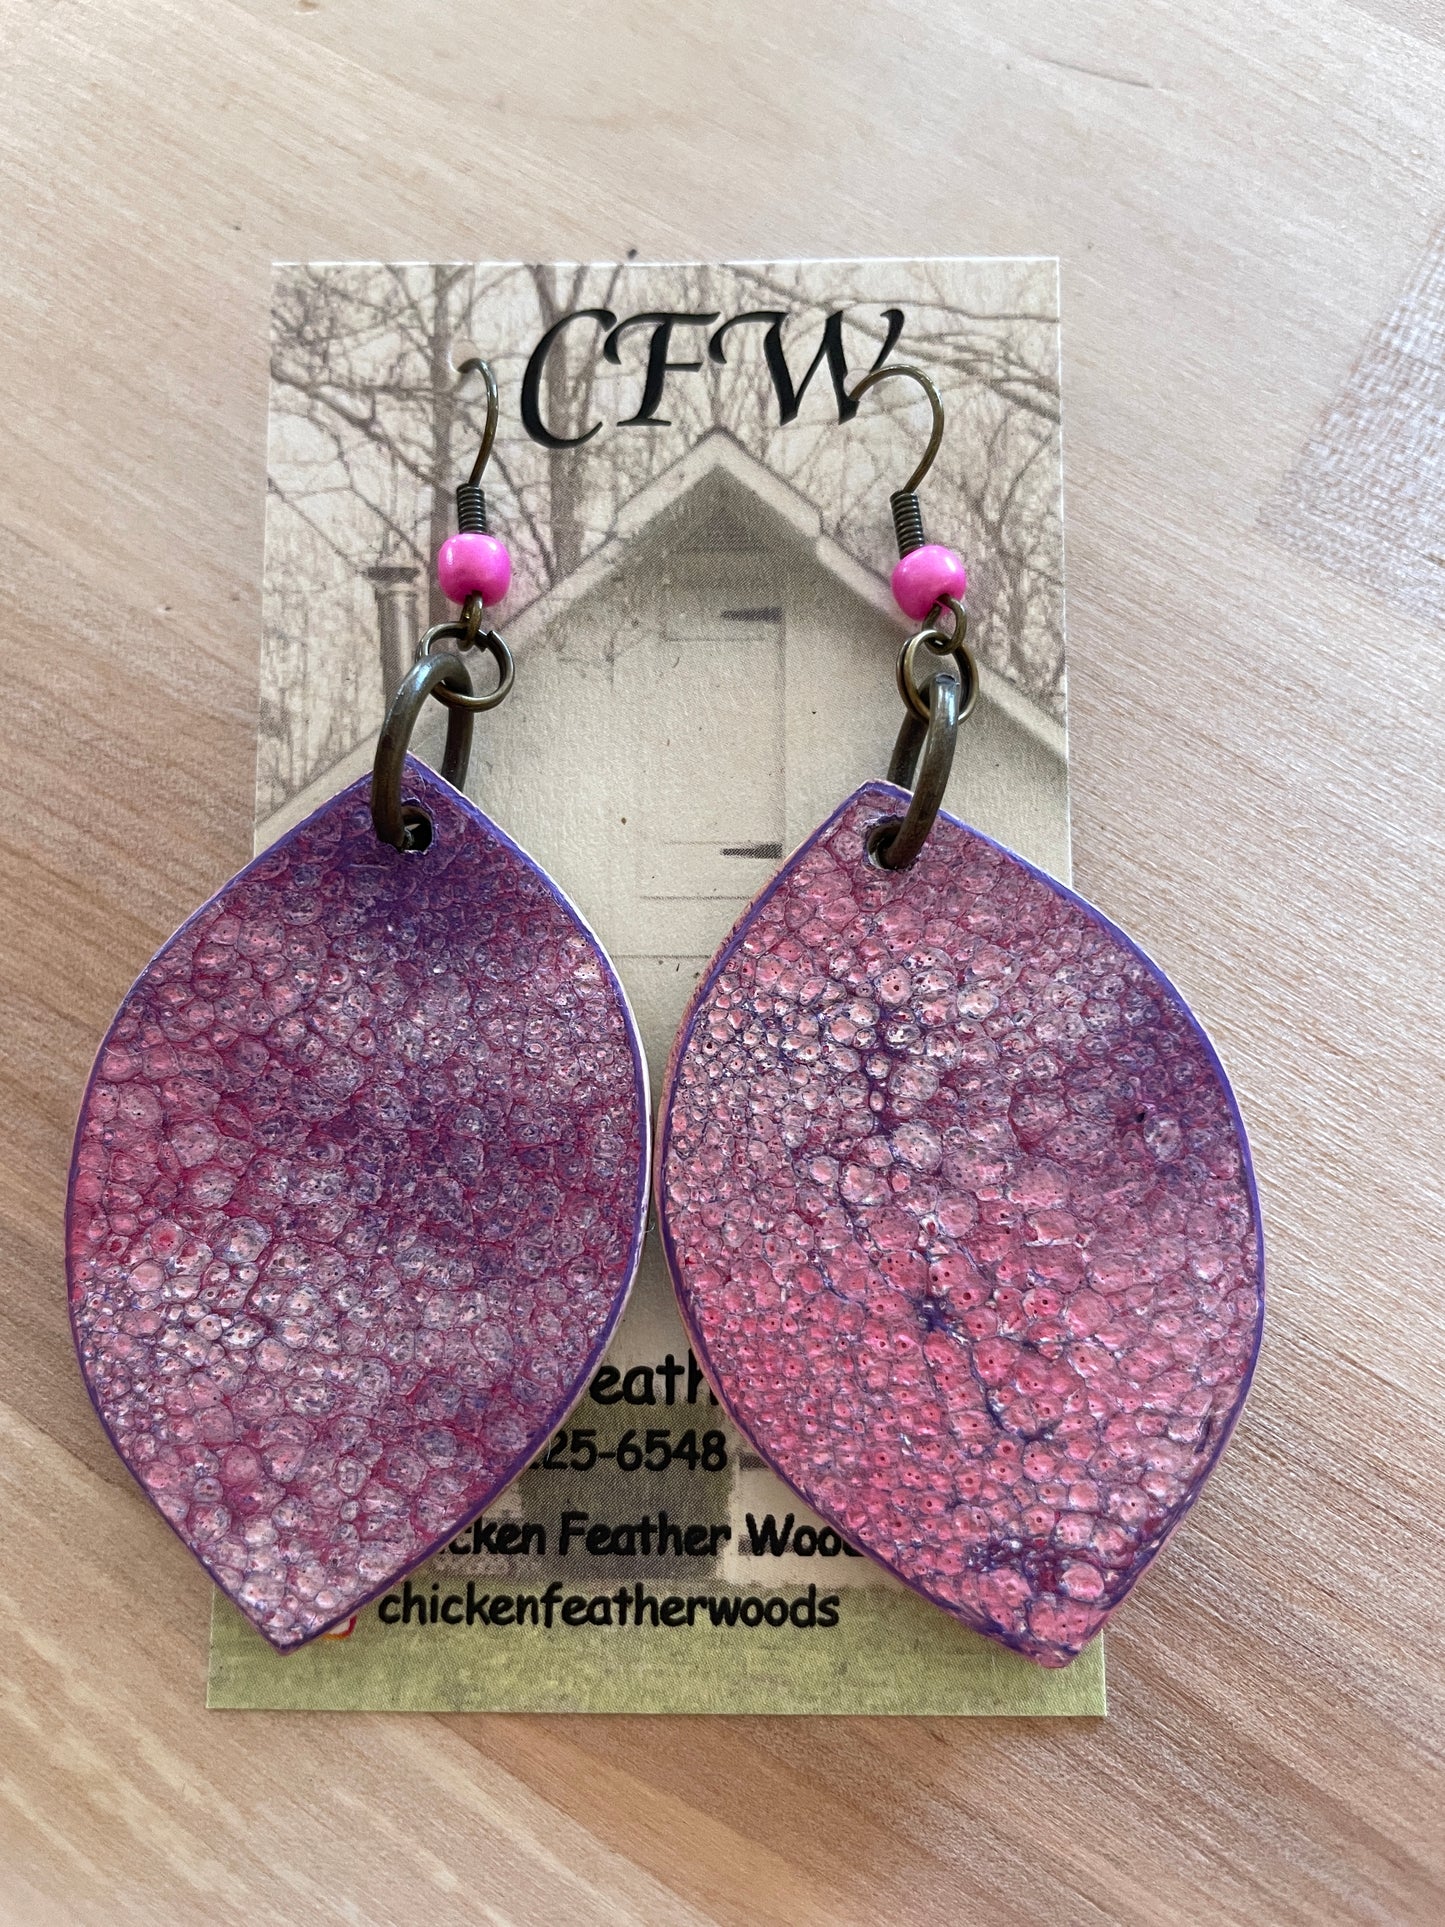 Chicken Feather Woods Earrings (large)